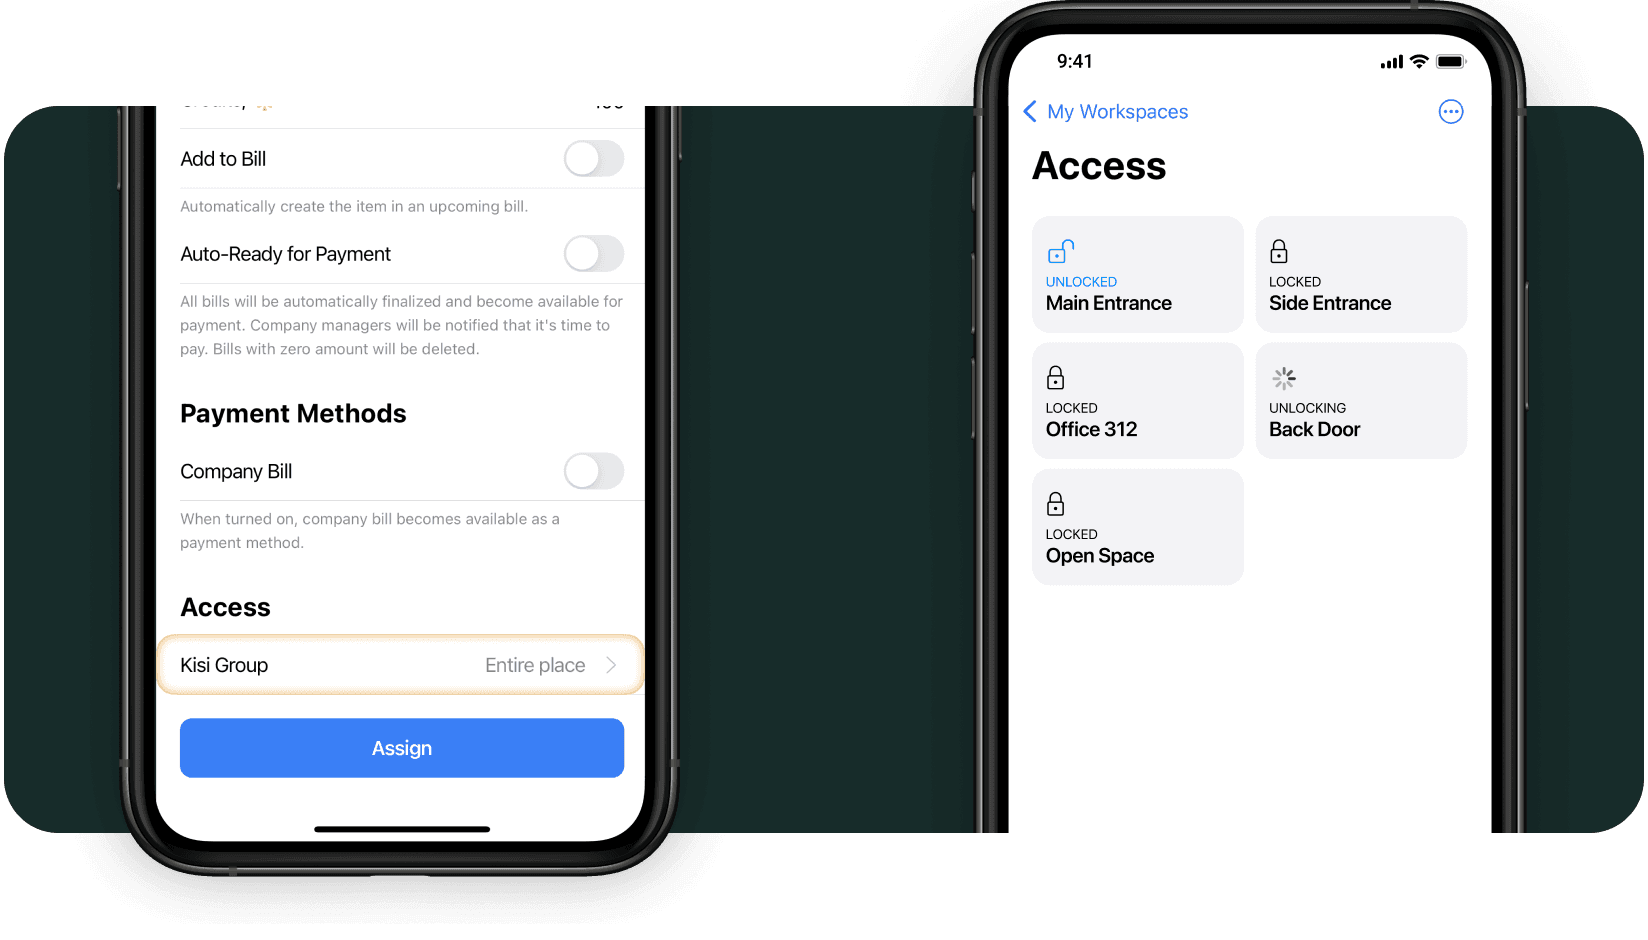 access control system integrated with andcards coworking software enables mangers give access to members according to their membership plans and unlock doors with a smartphone  